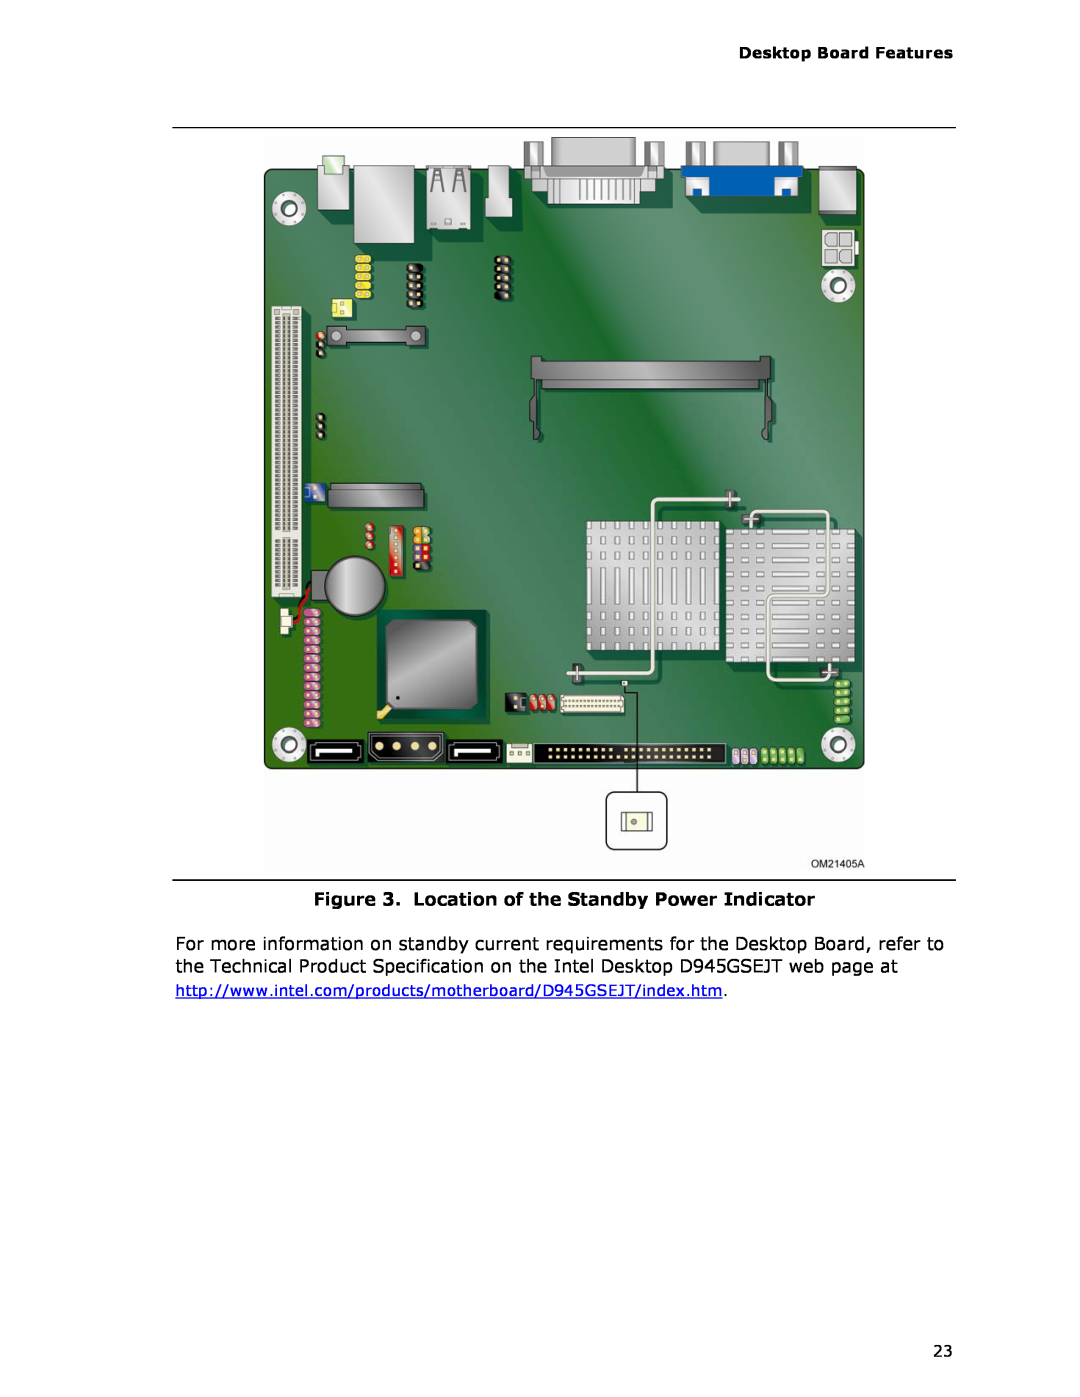 Intel D945GSEJT manual Location of the Standby Power Indicator 